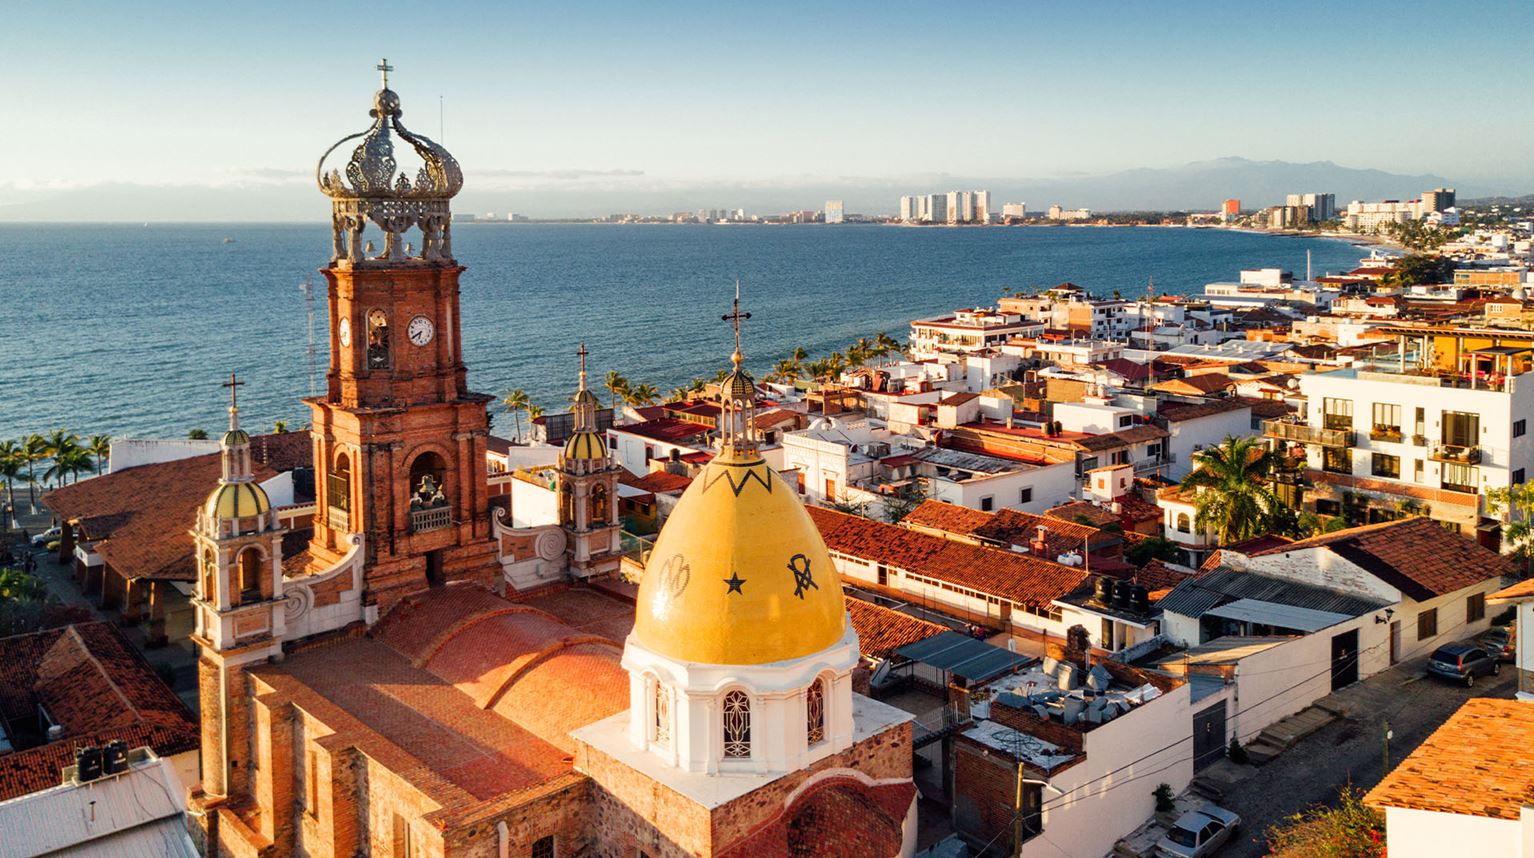 Aerial city view of Spanish-style architecture and sea